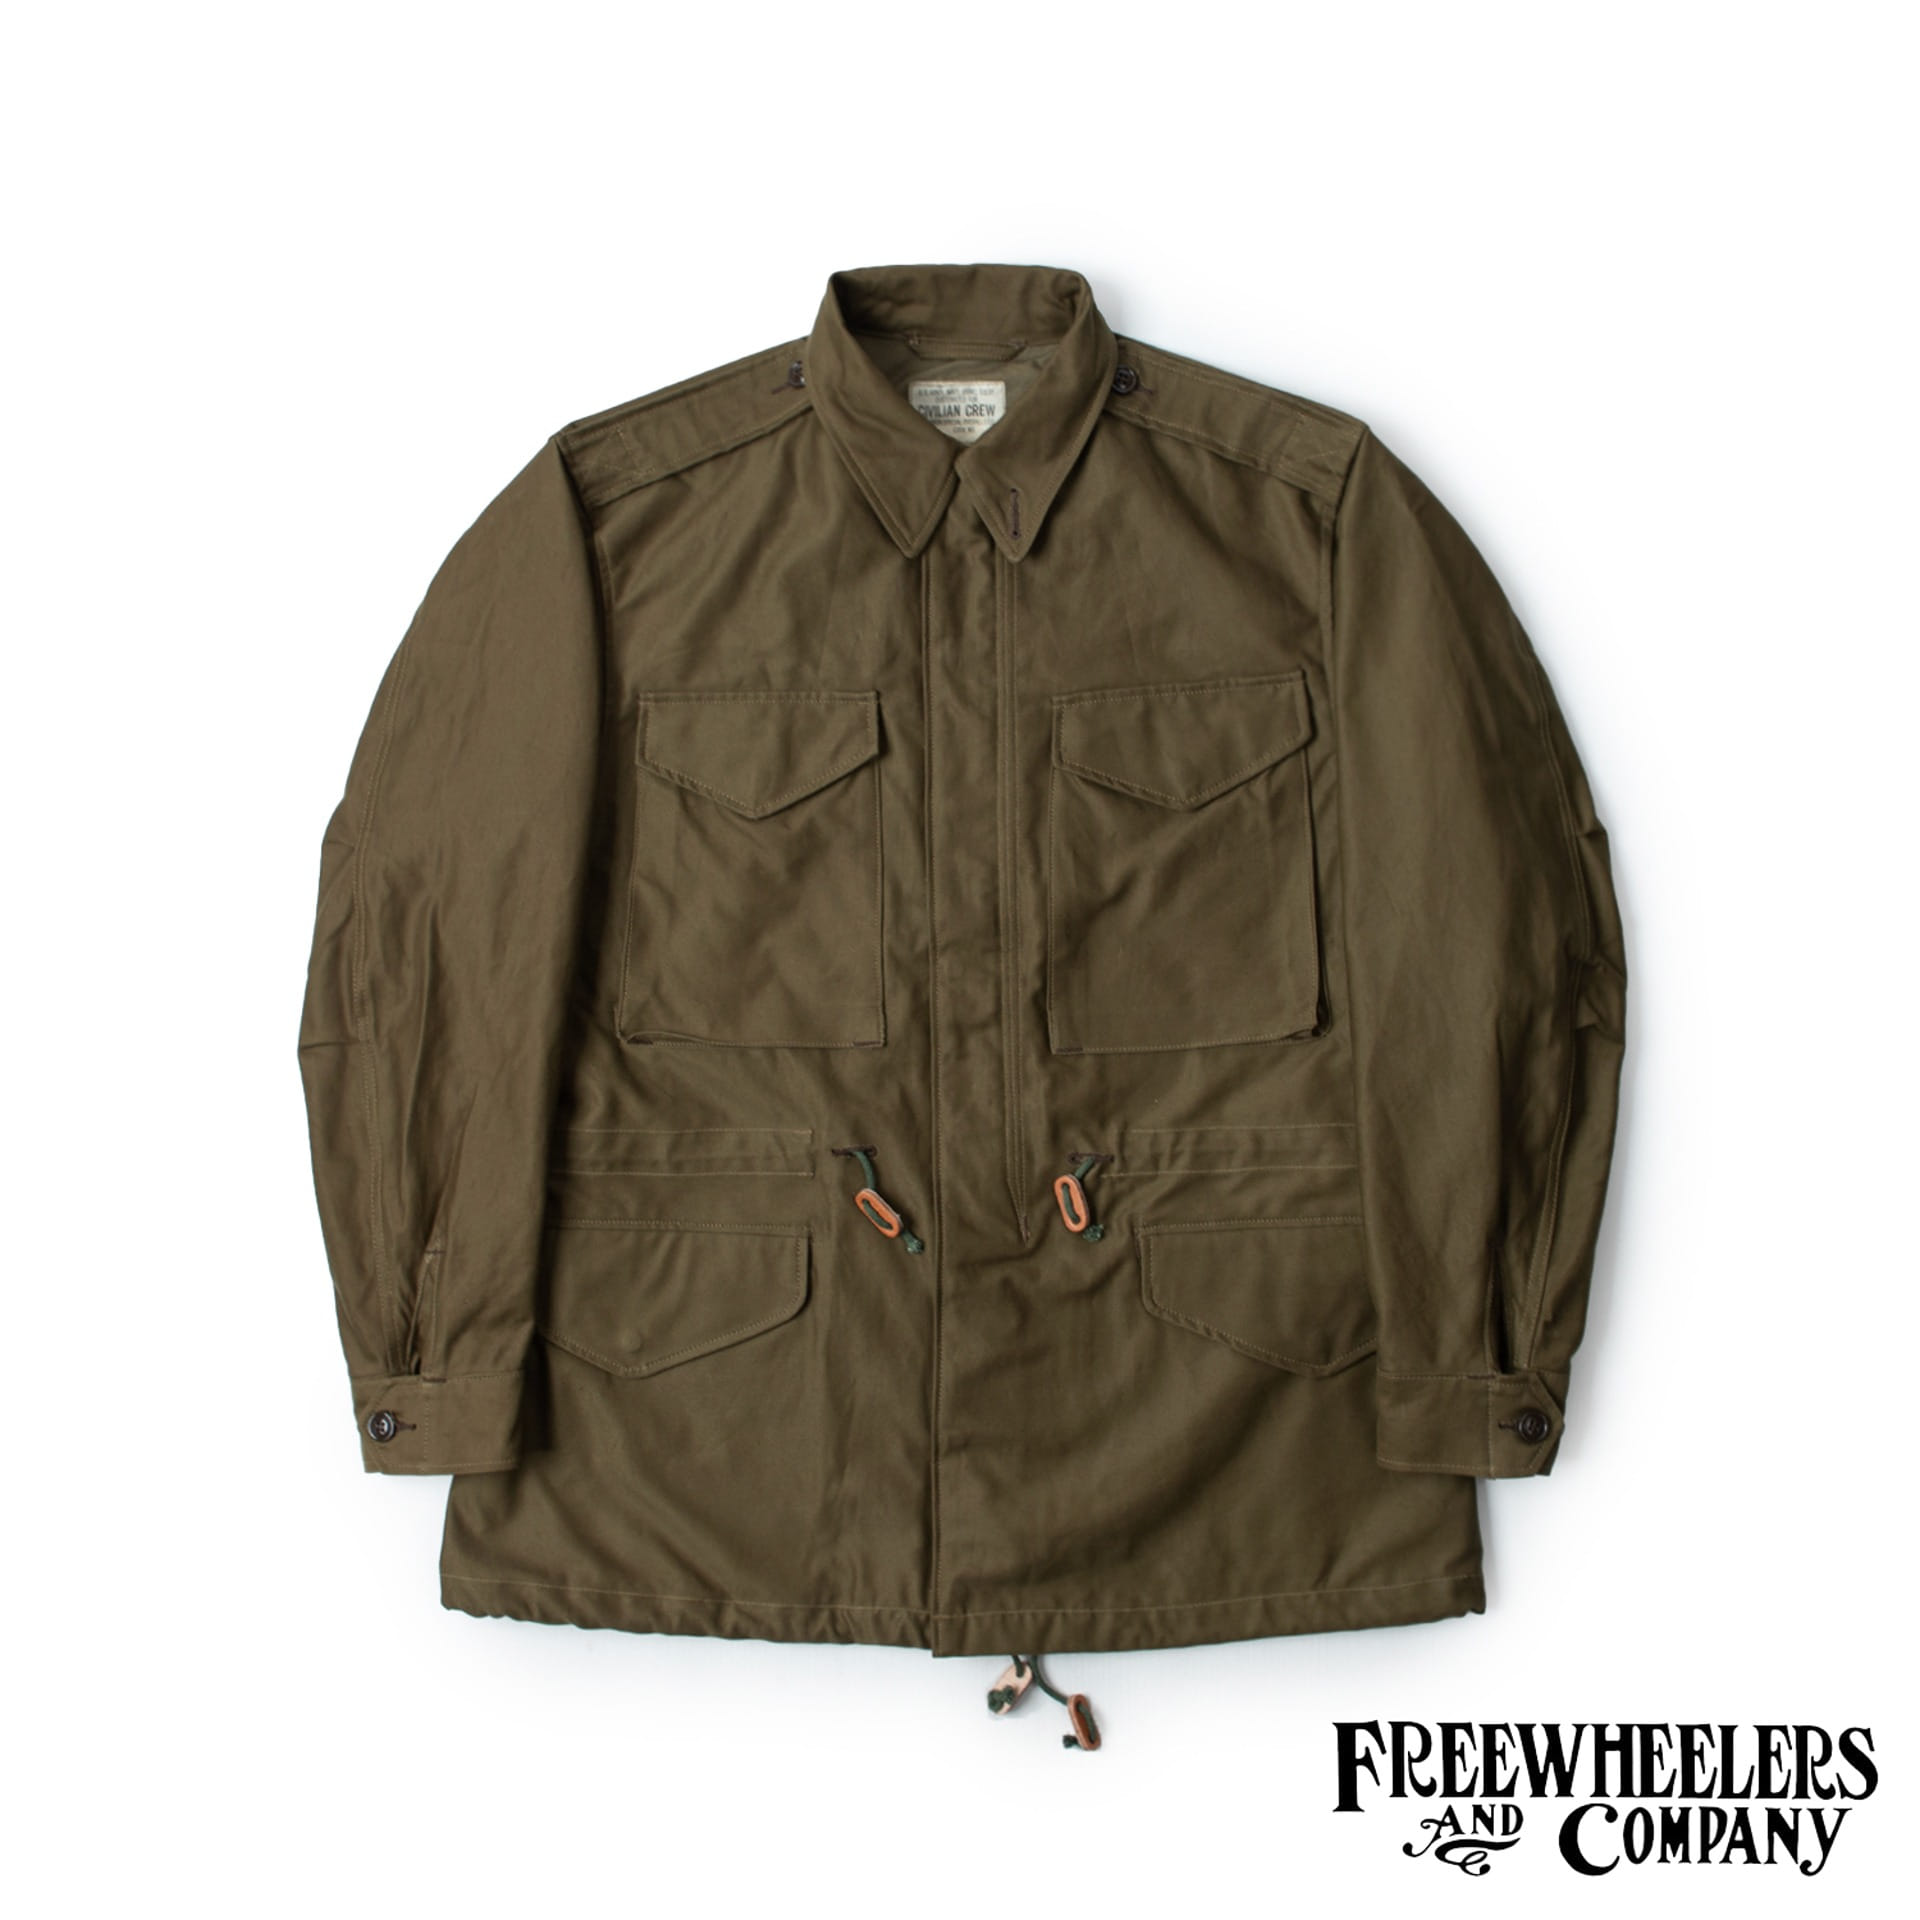  [UNION SPECIAL OVERALLS]  CIVILIAN MILITARY  “M-1951” FIELD JACKET  (Olive) 